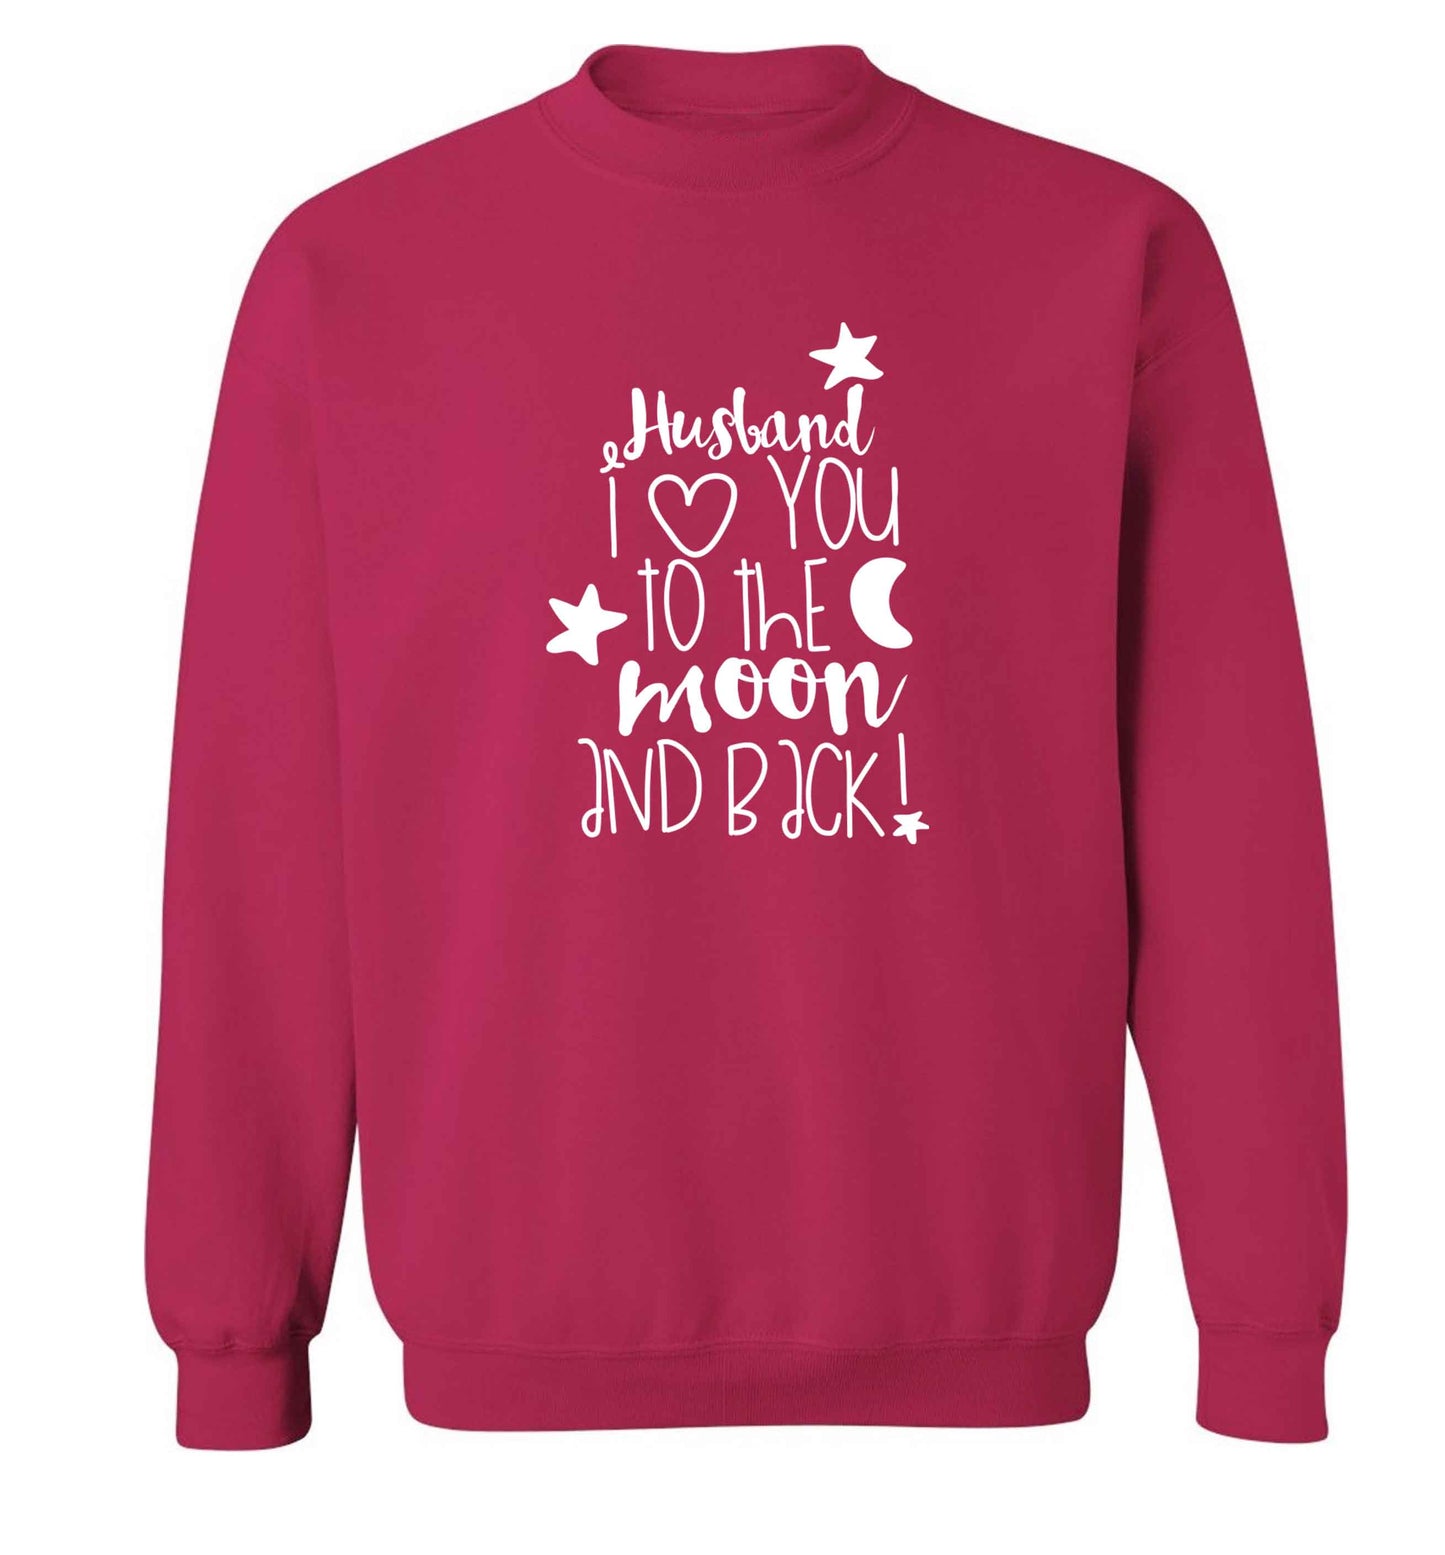 Husband I love you to the moon and back adult's unisex pink sweater 2XL